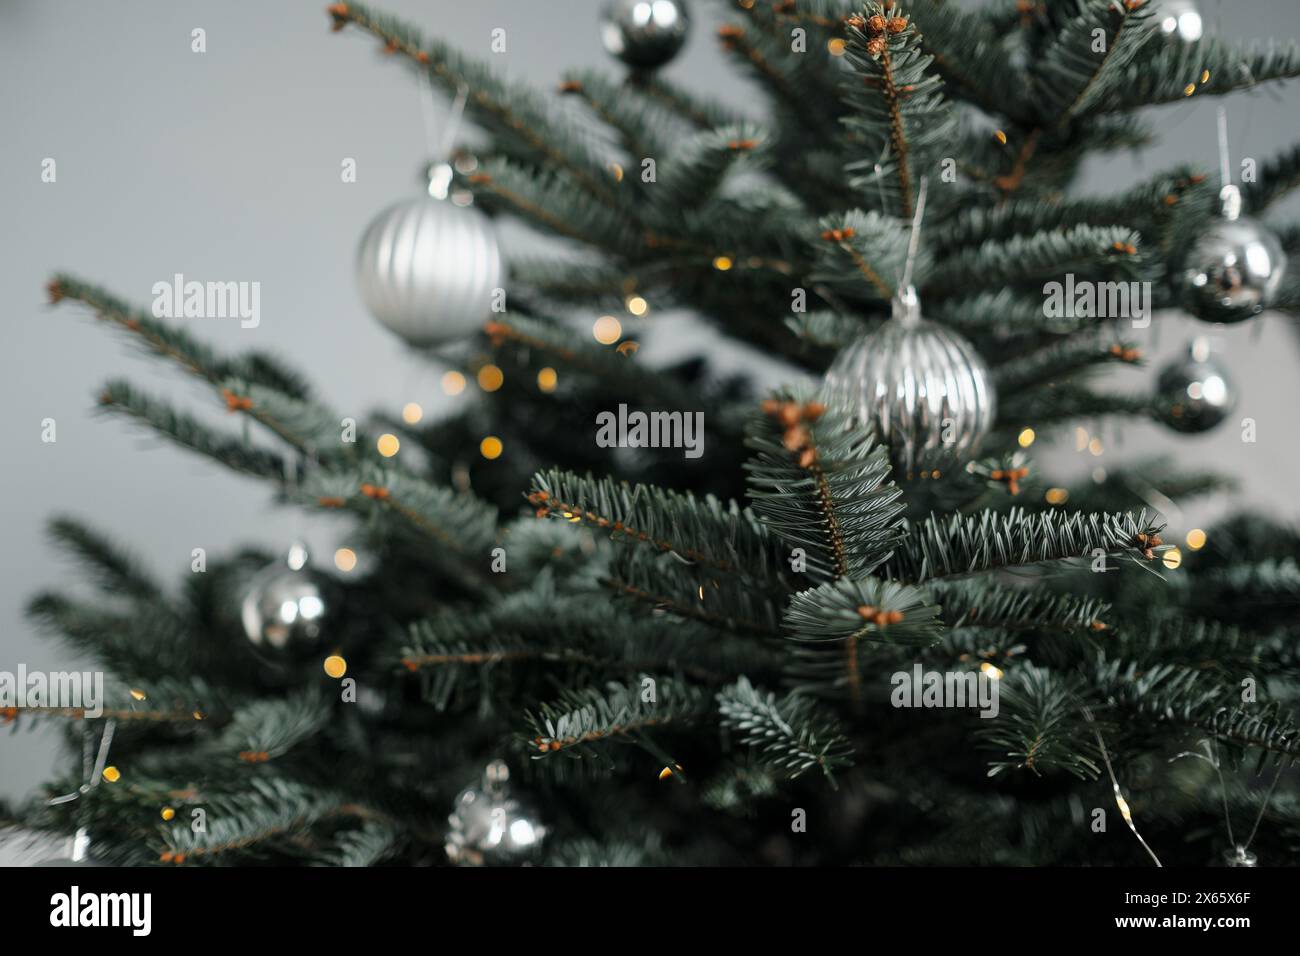 New Year's silver toys hanging on the Christmas tree Stock Photo